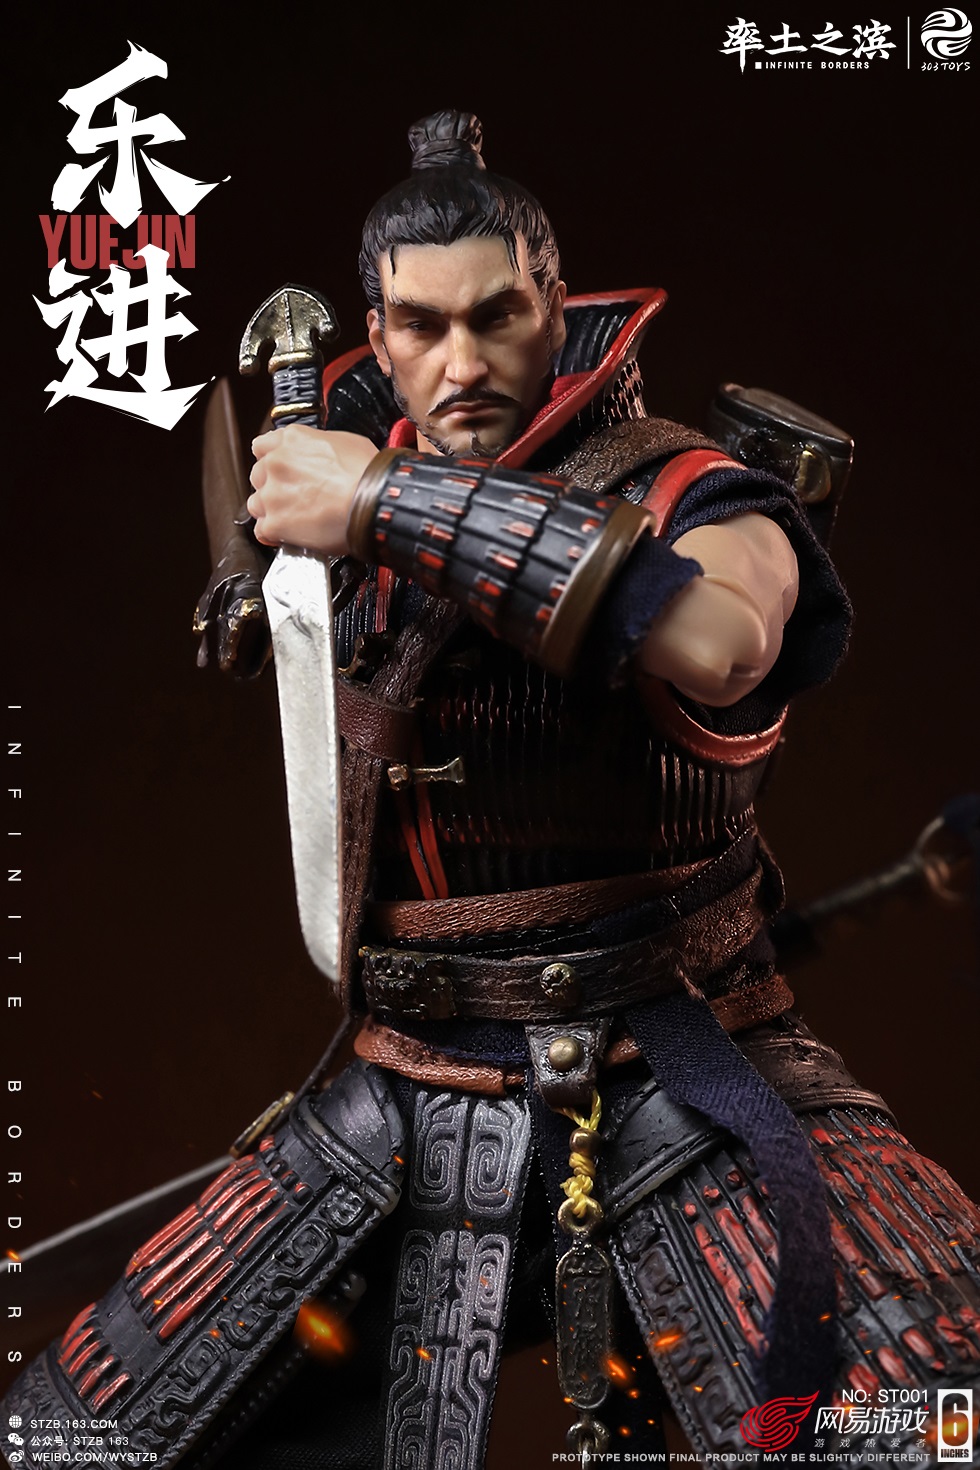 InifiniteBorders - NEW PRODUCT: INFINITE BORDERS X 303TOYS 1/12 - The Five Sons of Elite Generals: Yue Jin ST001 07152